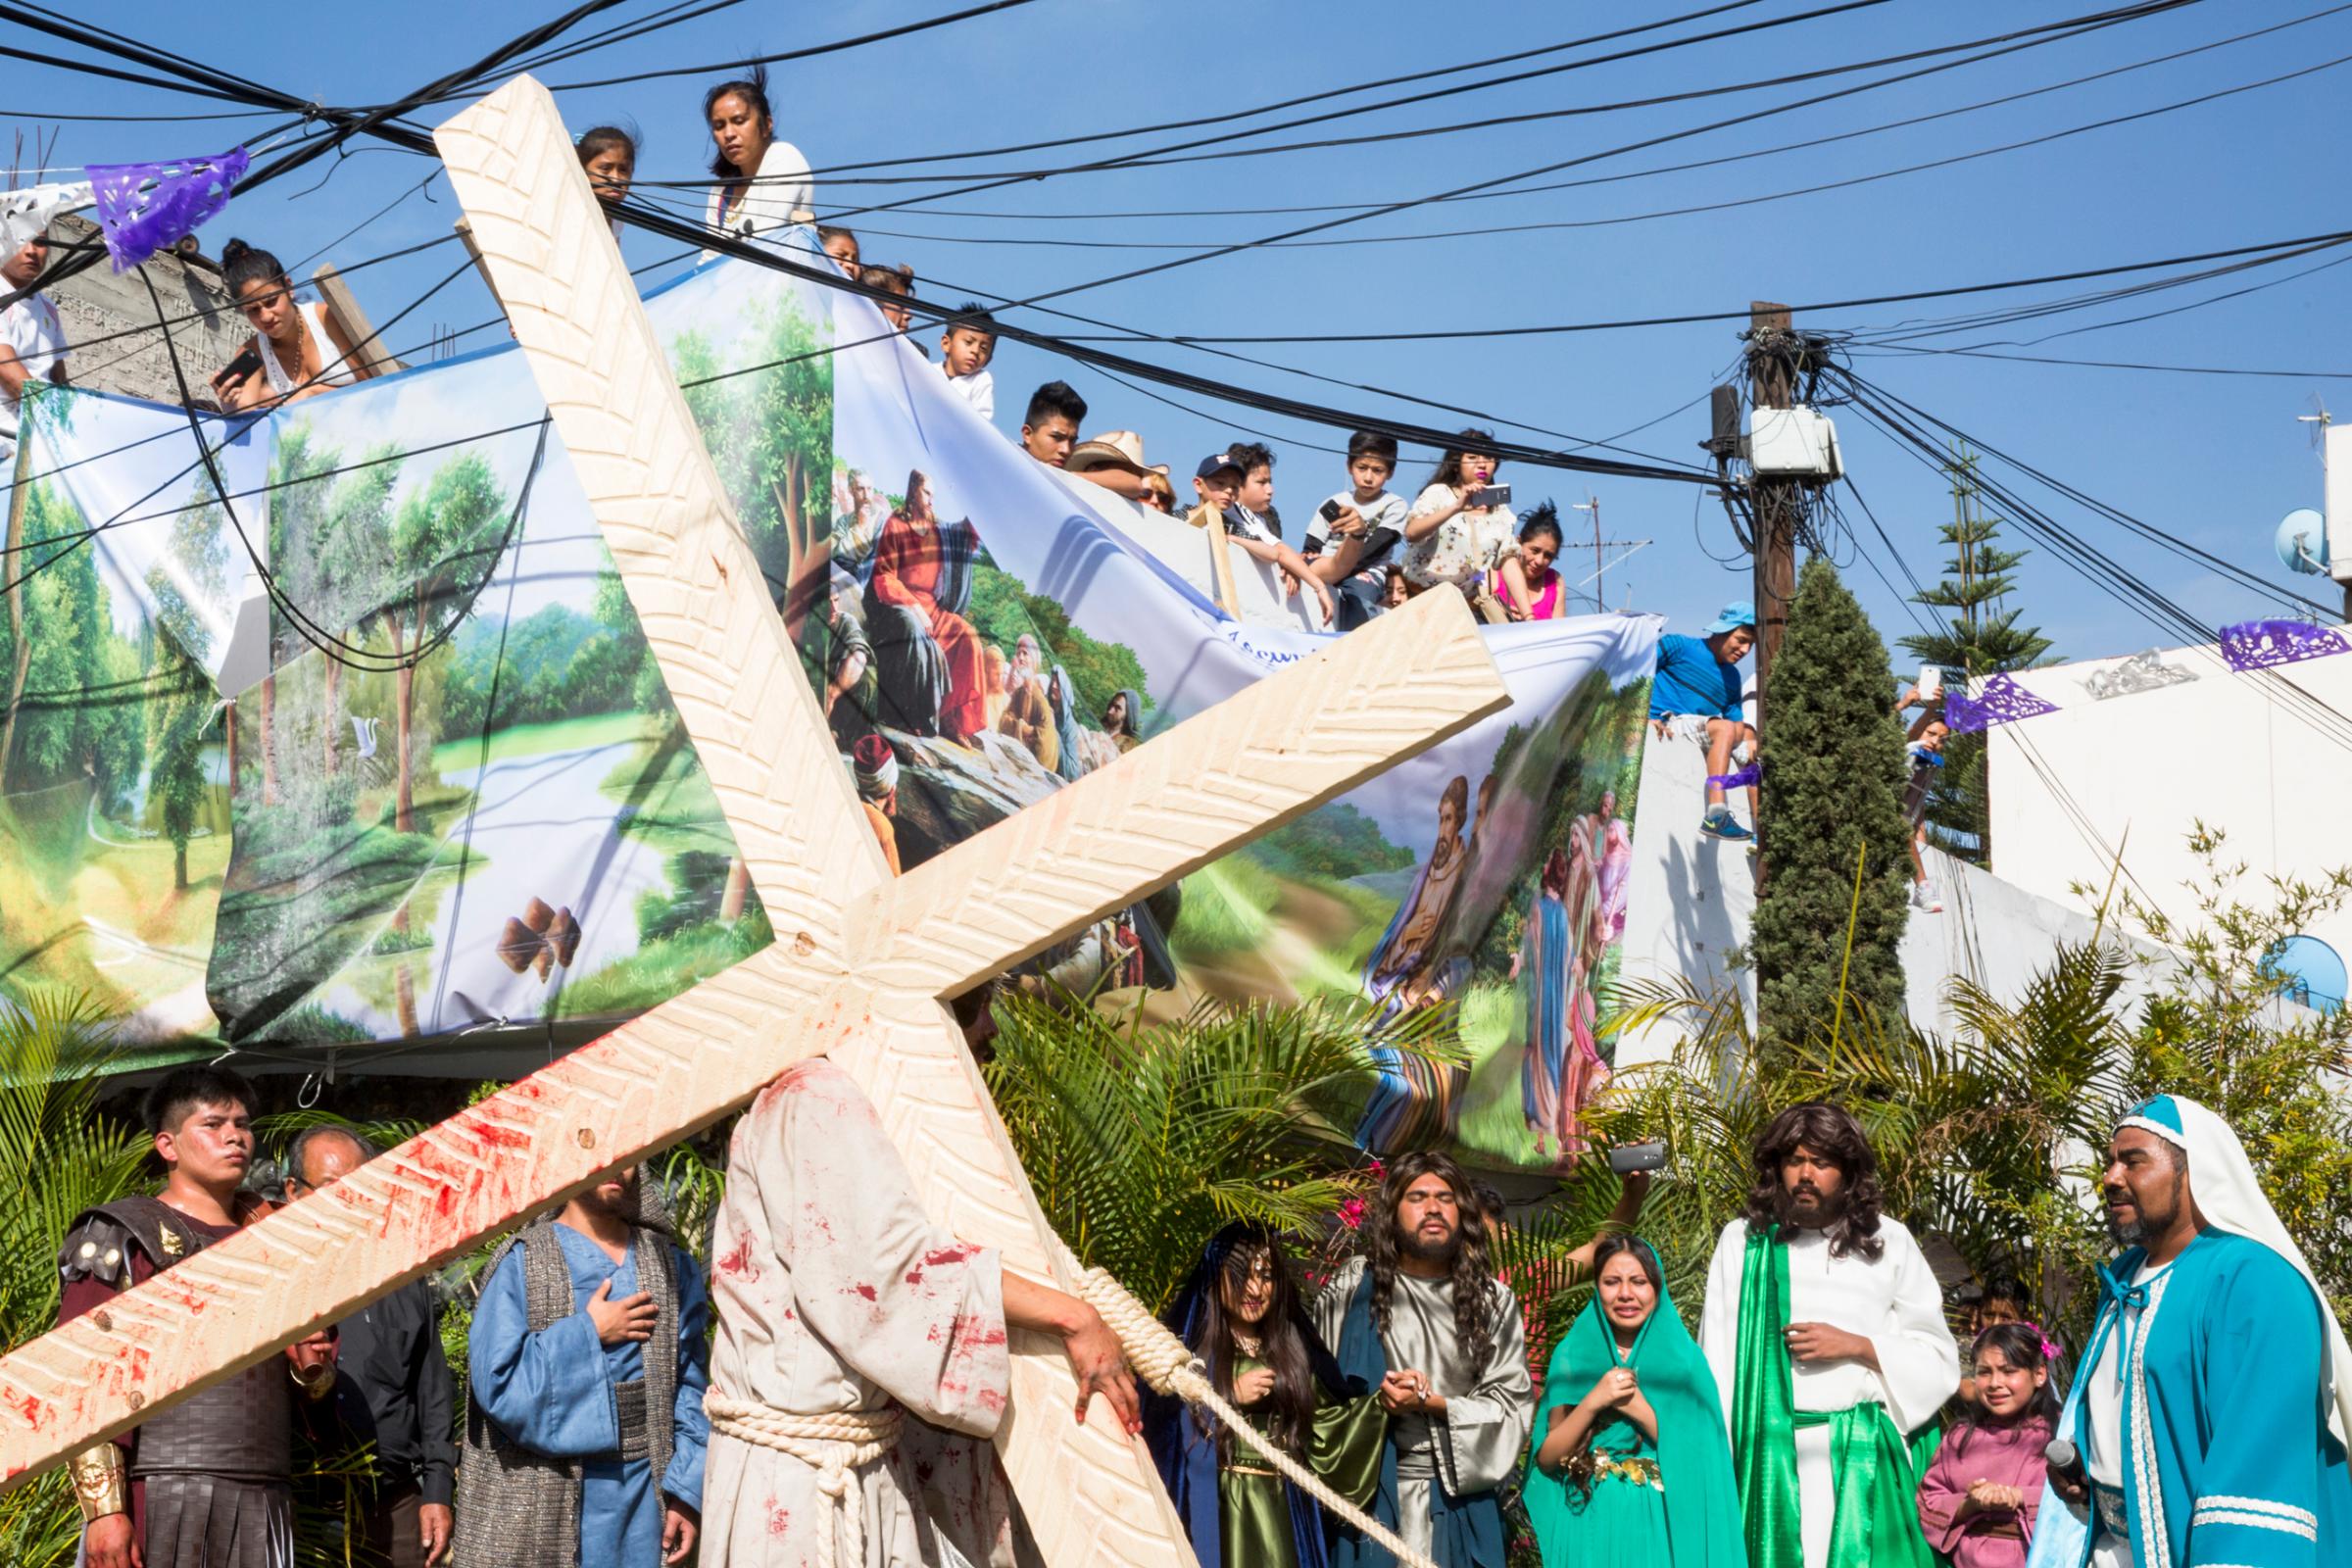 A reenactment of the crucifixion of Jesus during the Holy Week celebrations in Iztapalapa, Mexico.